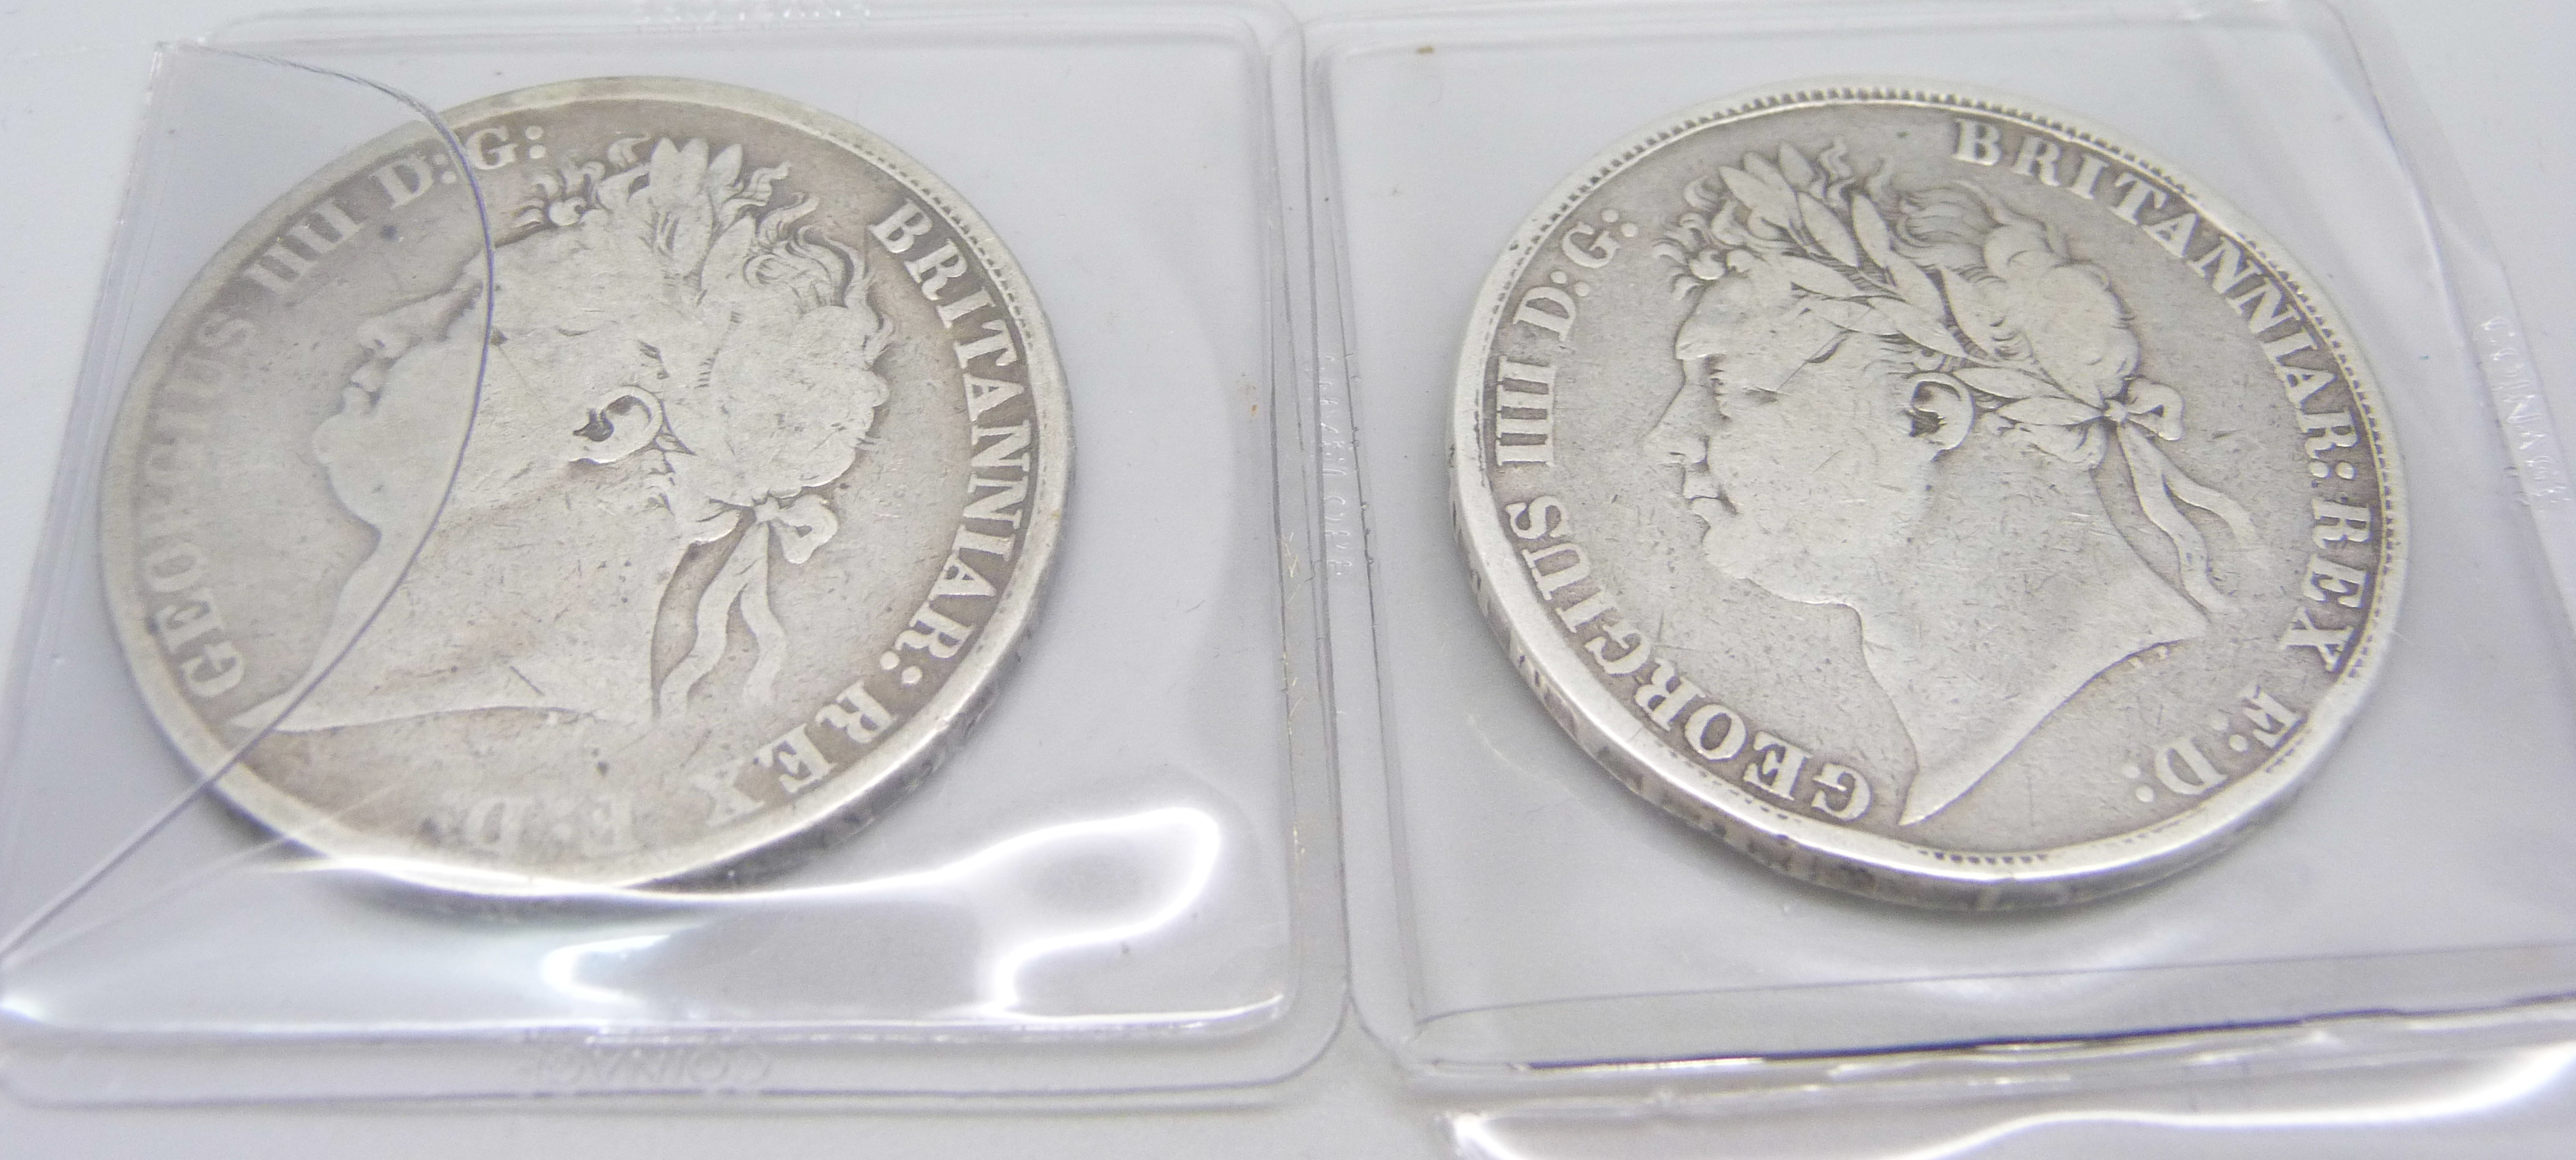 An 1822 George IV Tertio edge crown and an 1821 George IV Secundo edge crown - Image 2 of 2